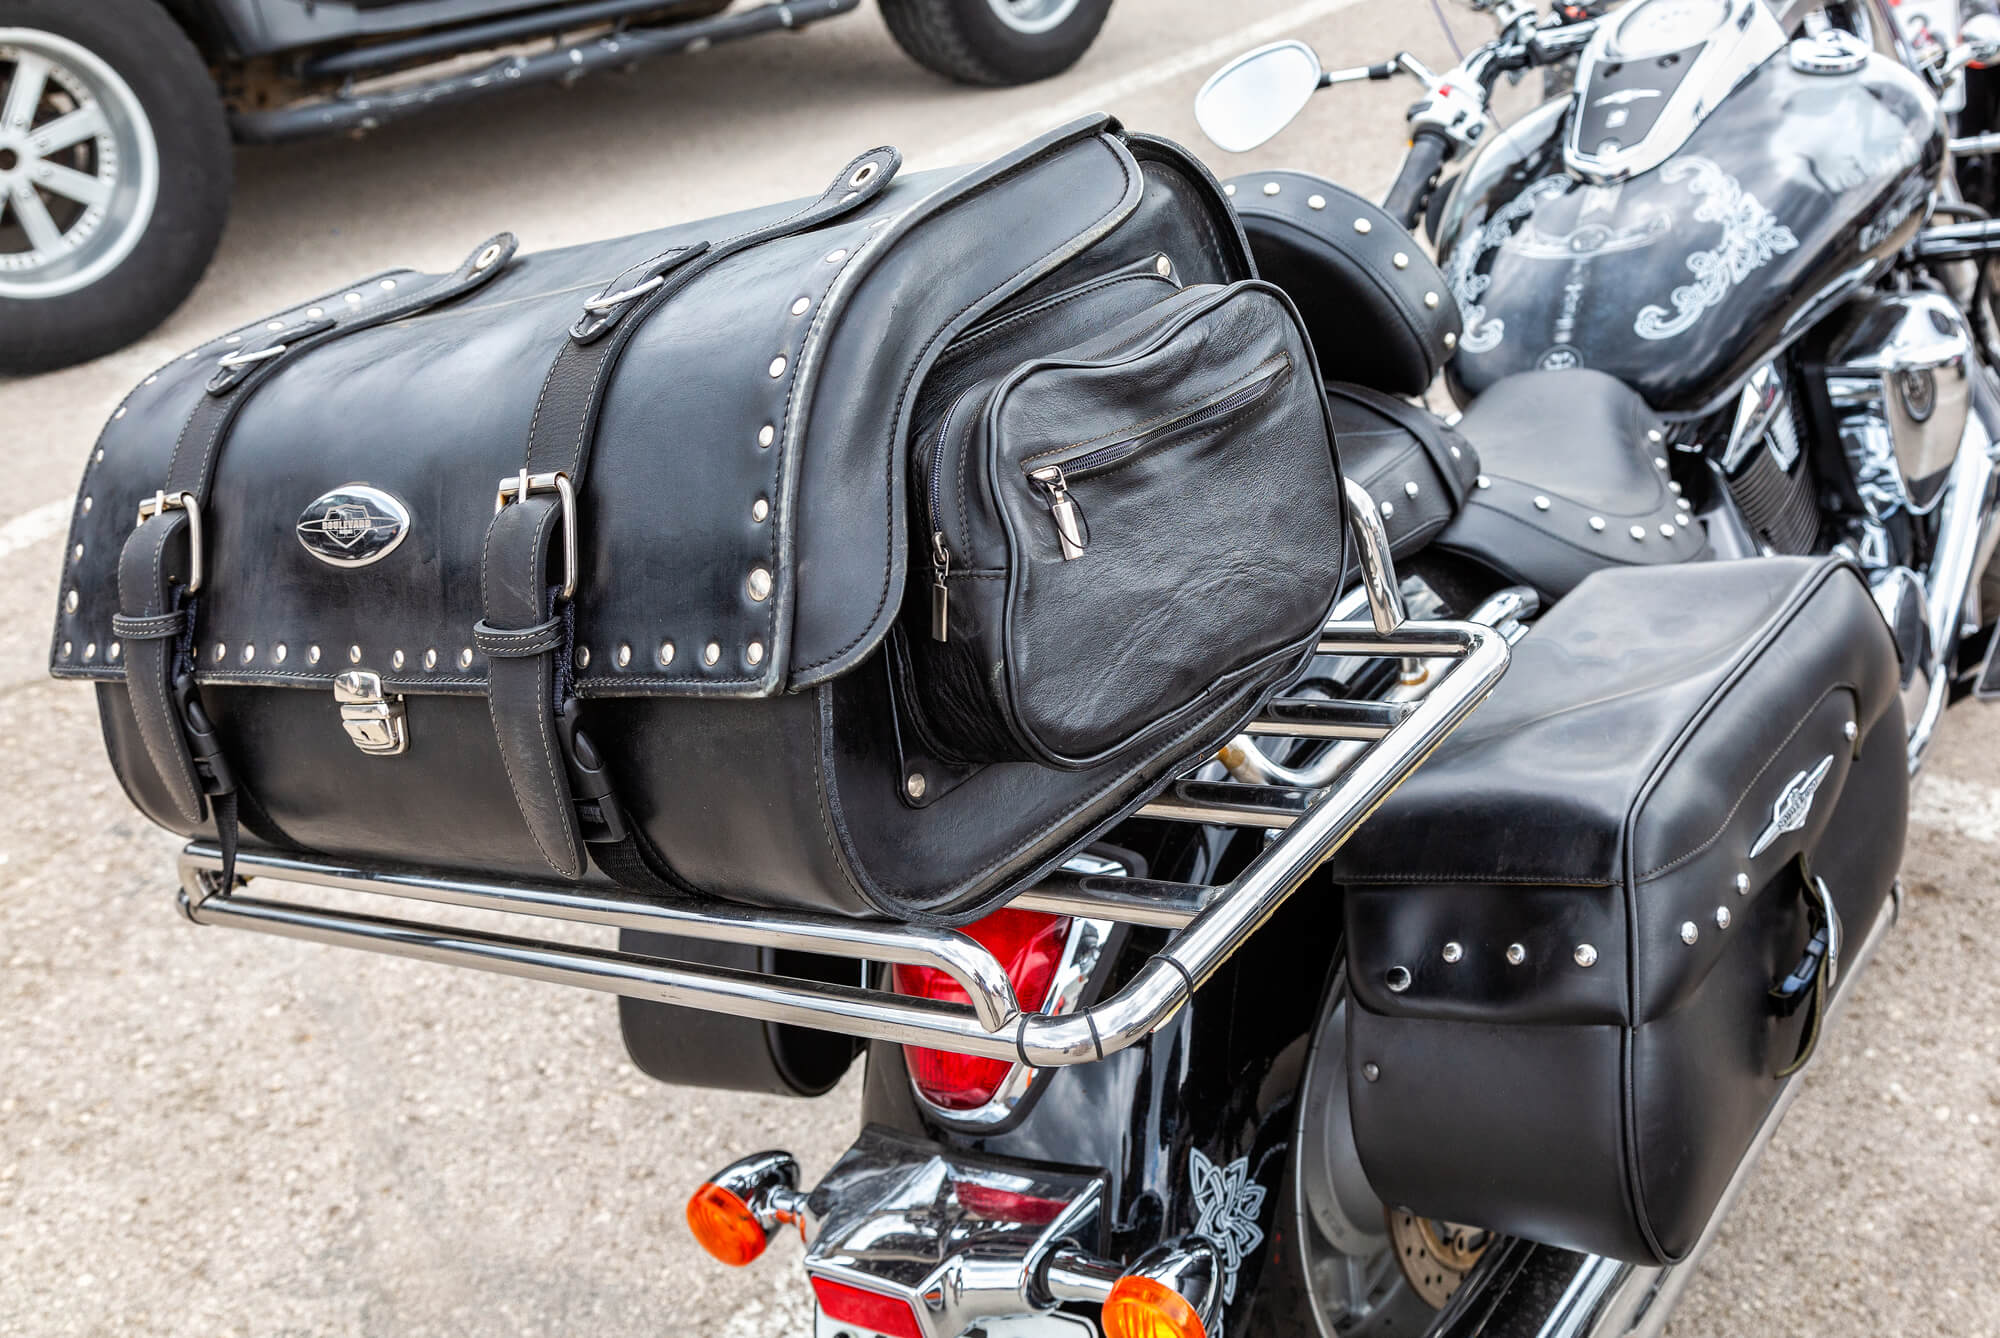 HARPERS MOTORCYCLE CLOTHING AND ACCESSORIES